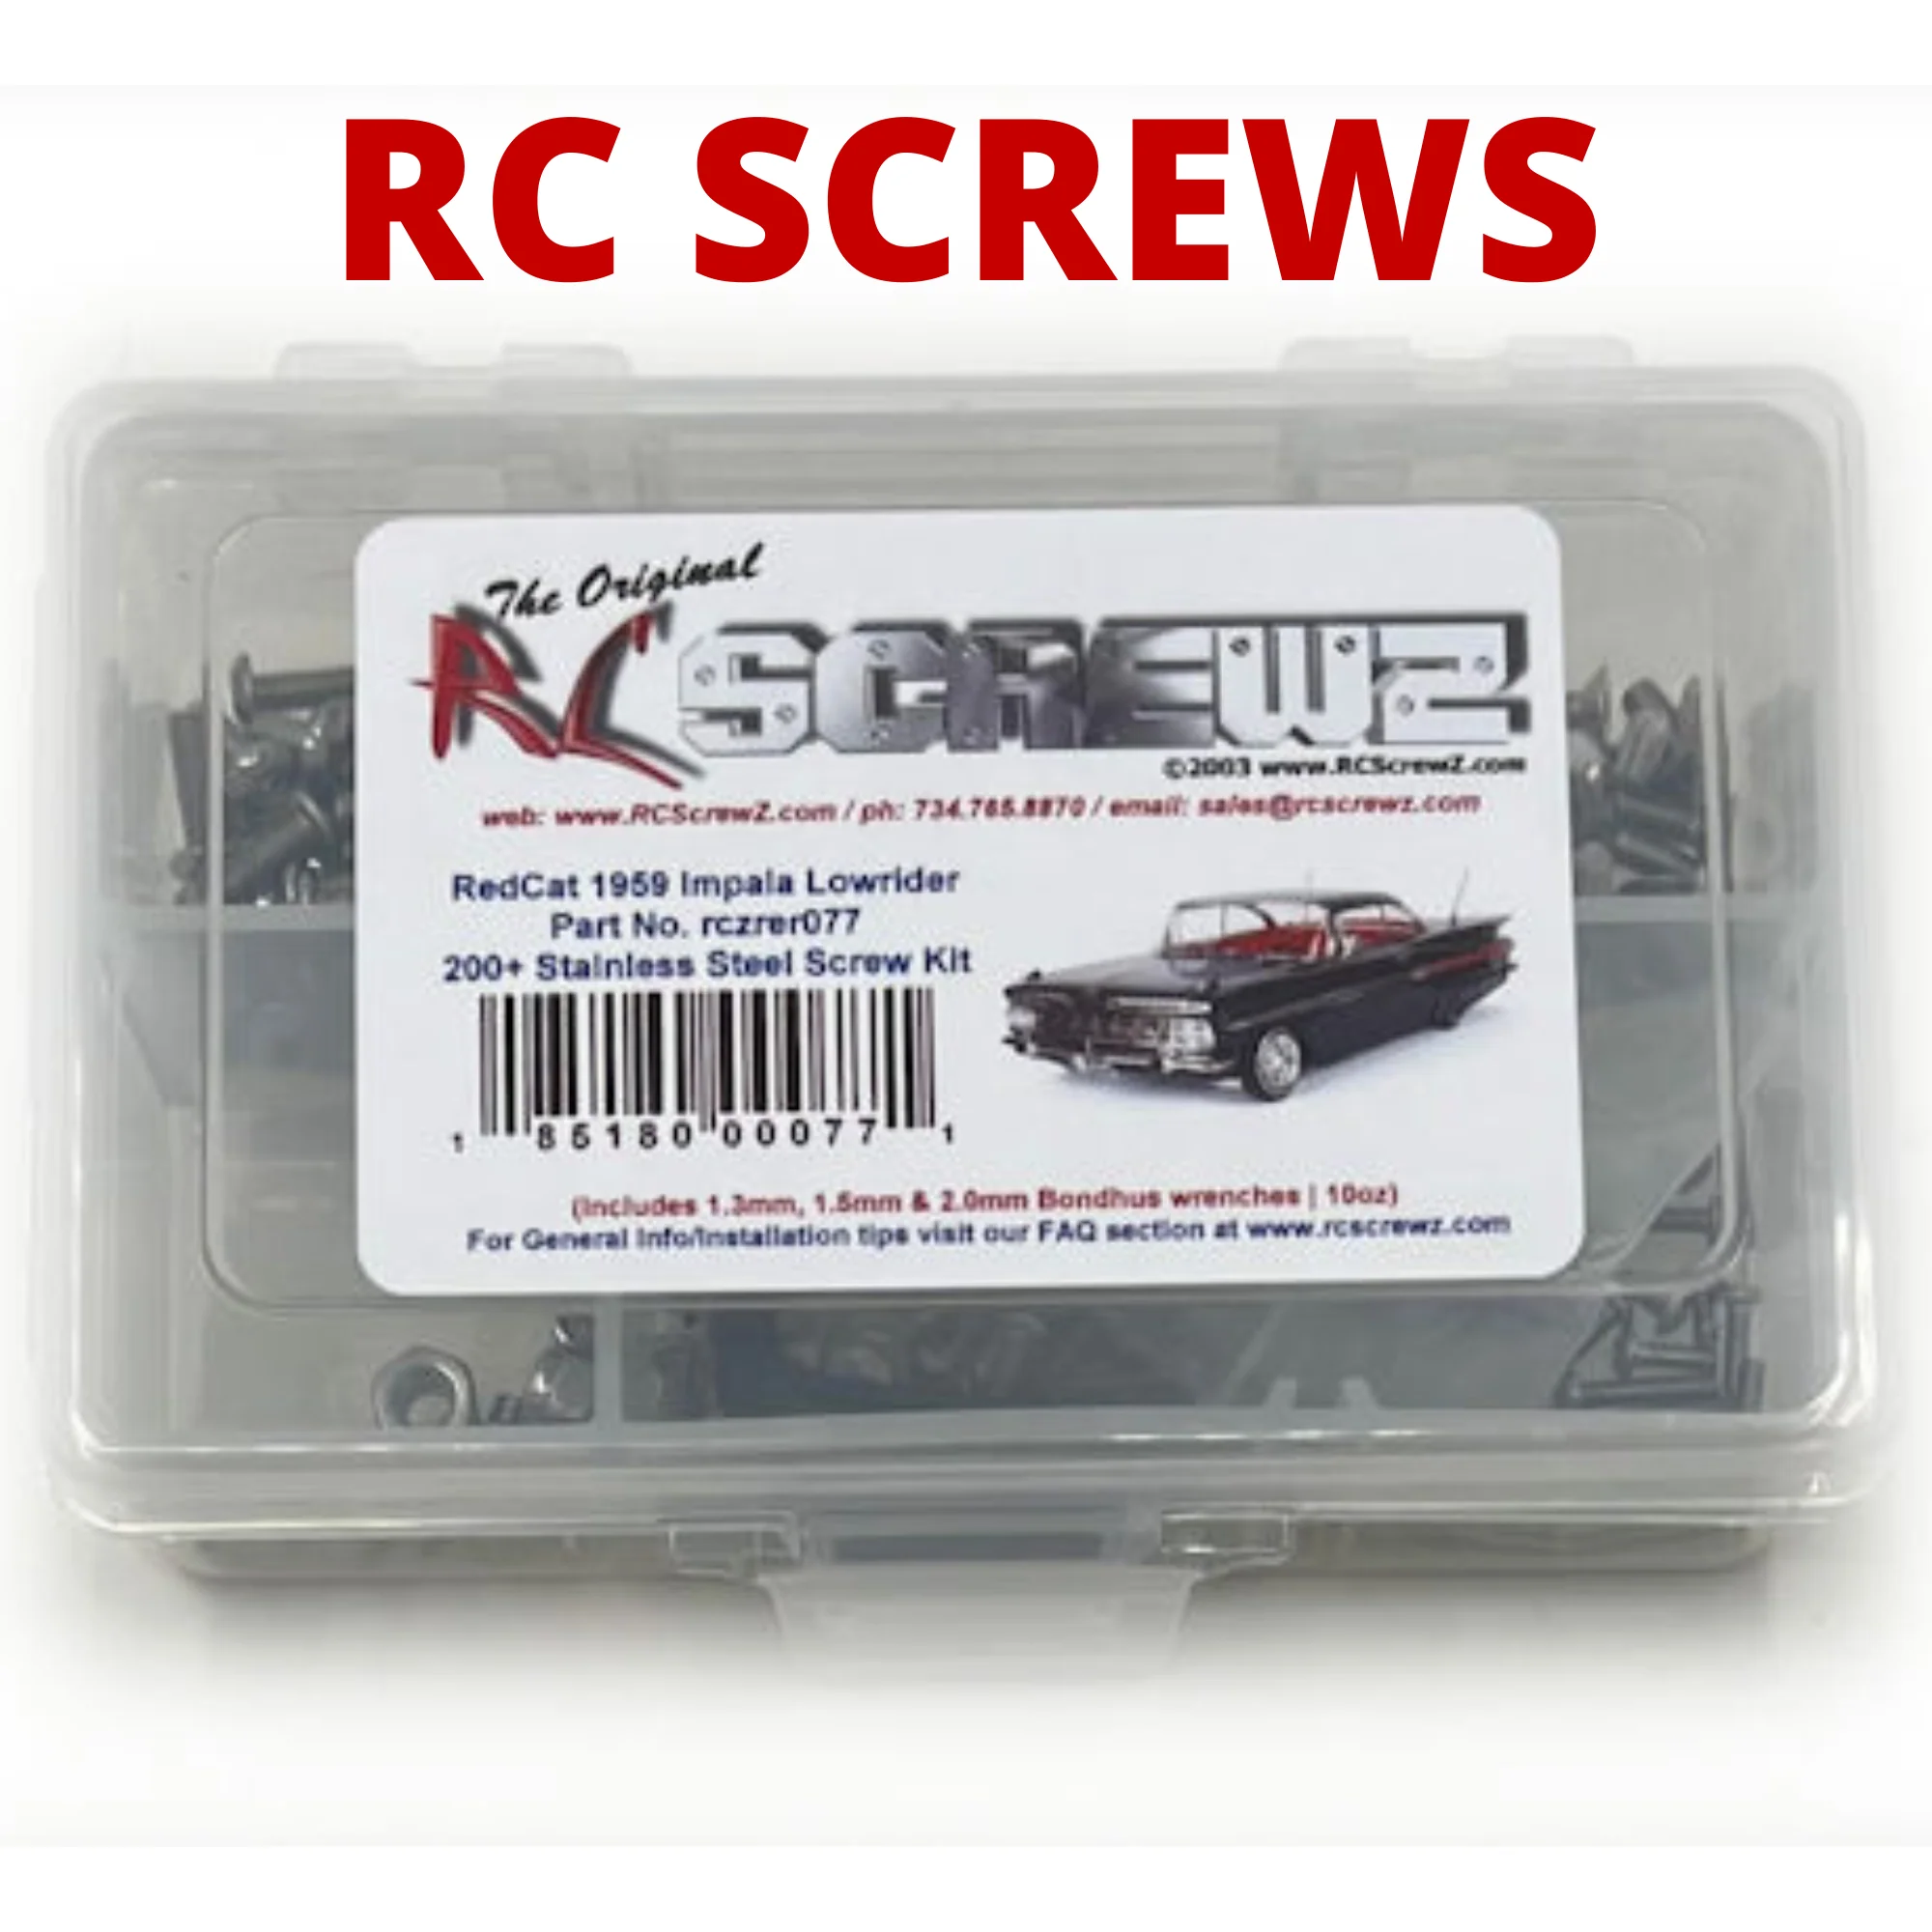 RCScrewZ Stainless Screw Kit rer077 for Redcat FiftyNine 1959 Impala Lowrider RC - Picture 2 of 12